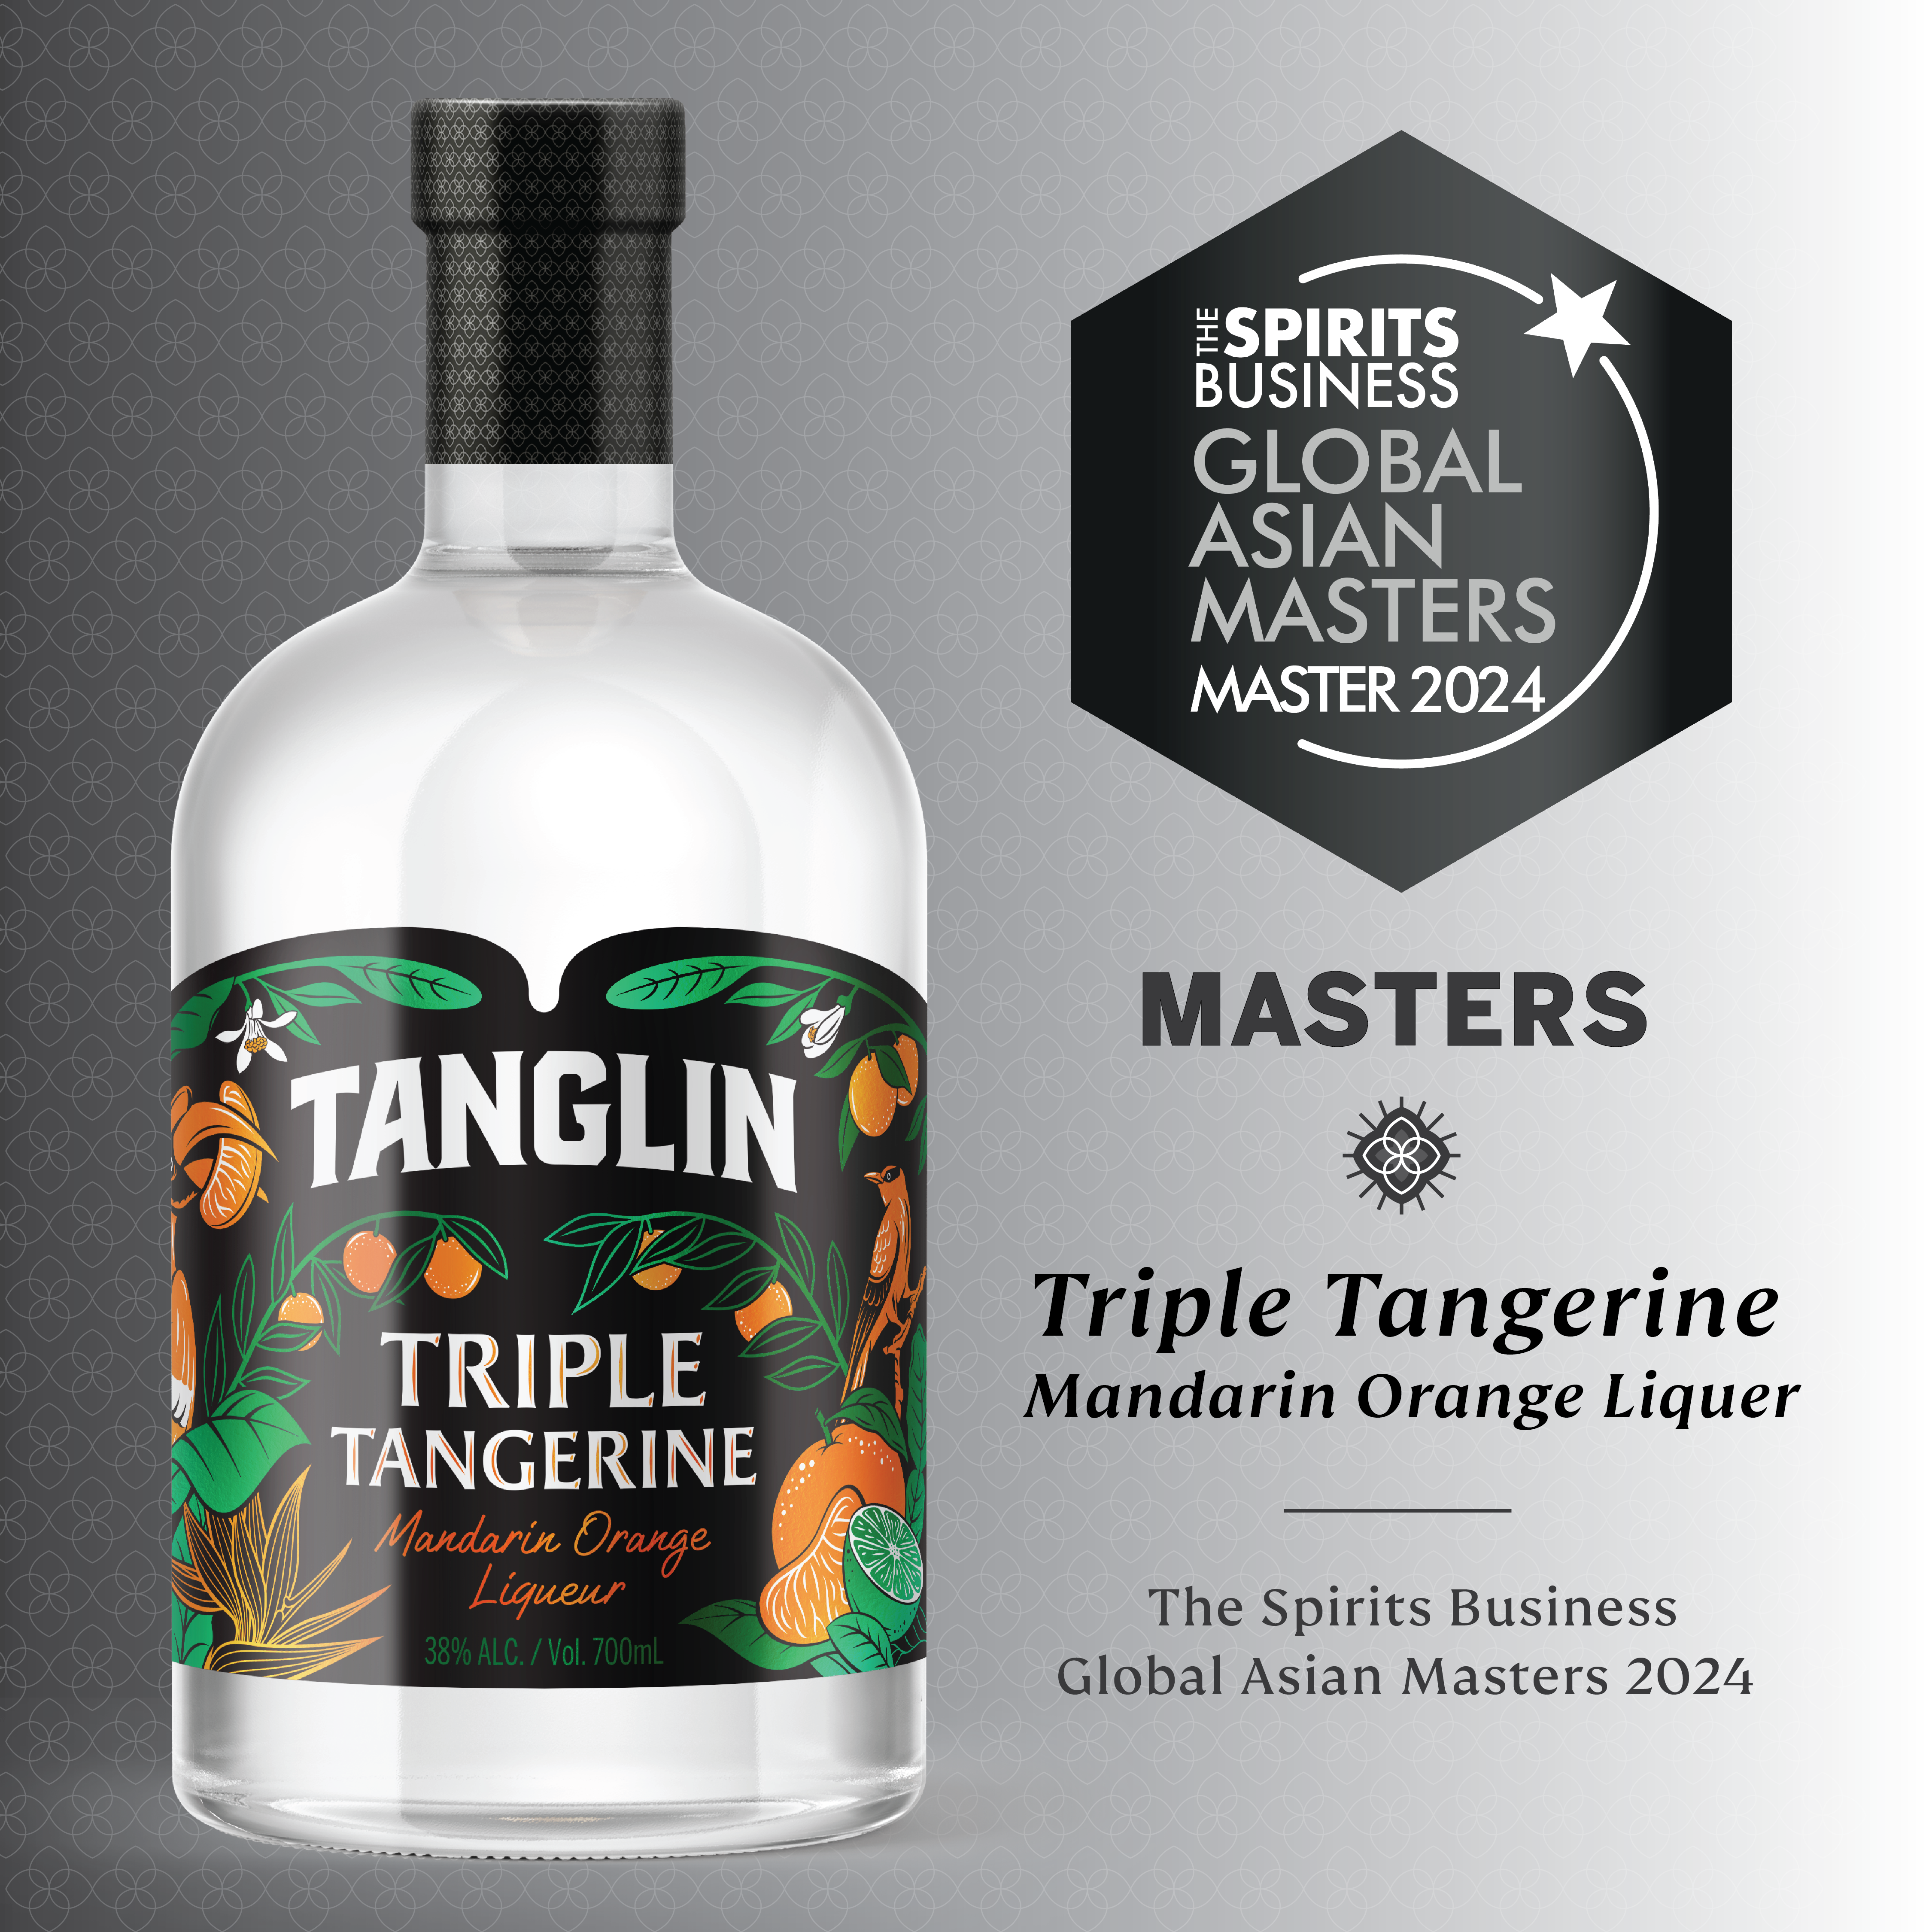 Received the highest accolade—MASTER in the Liqueurs Made in Asia category